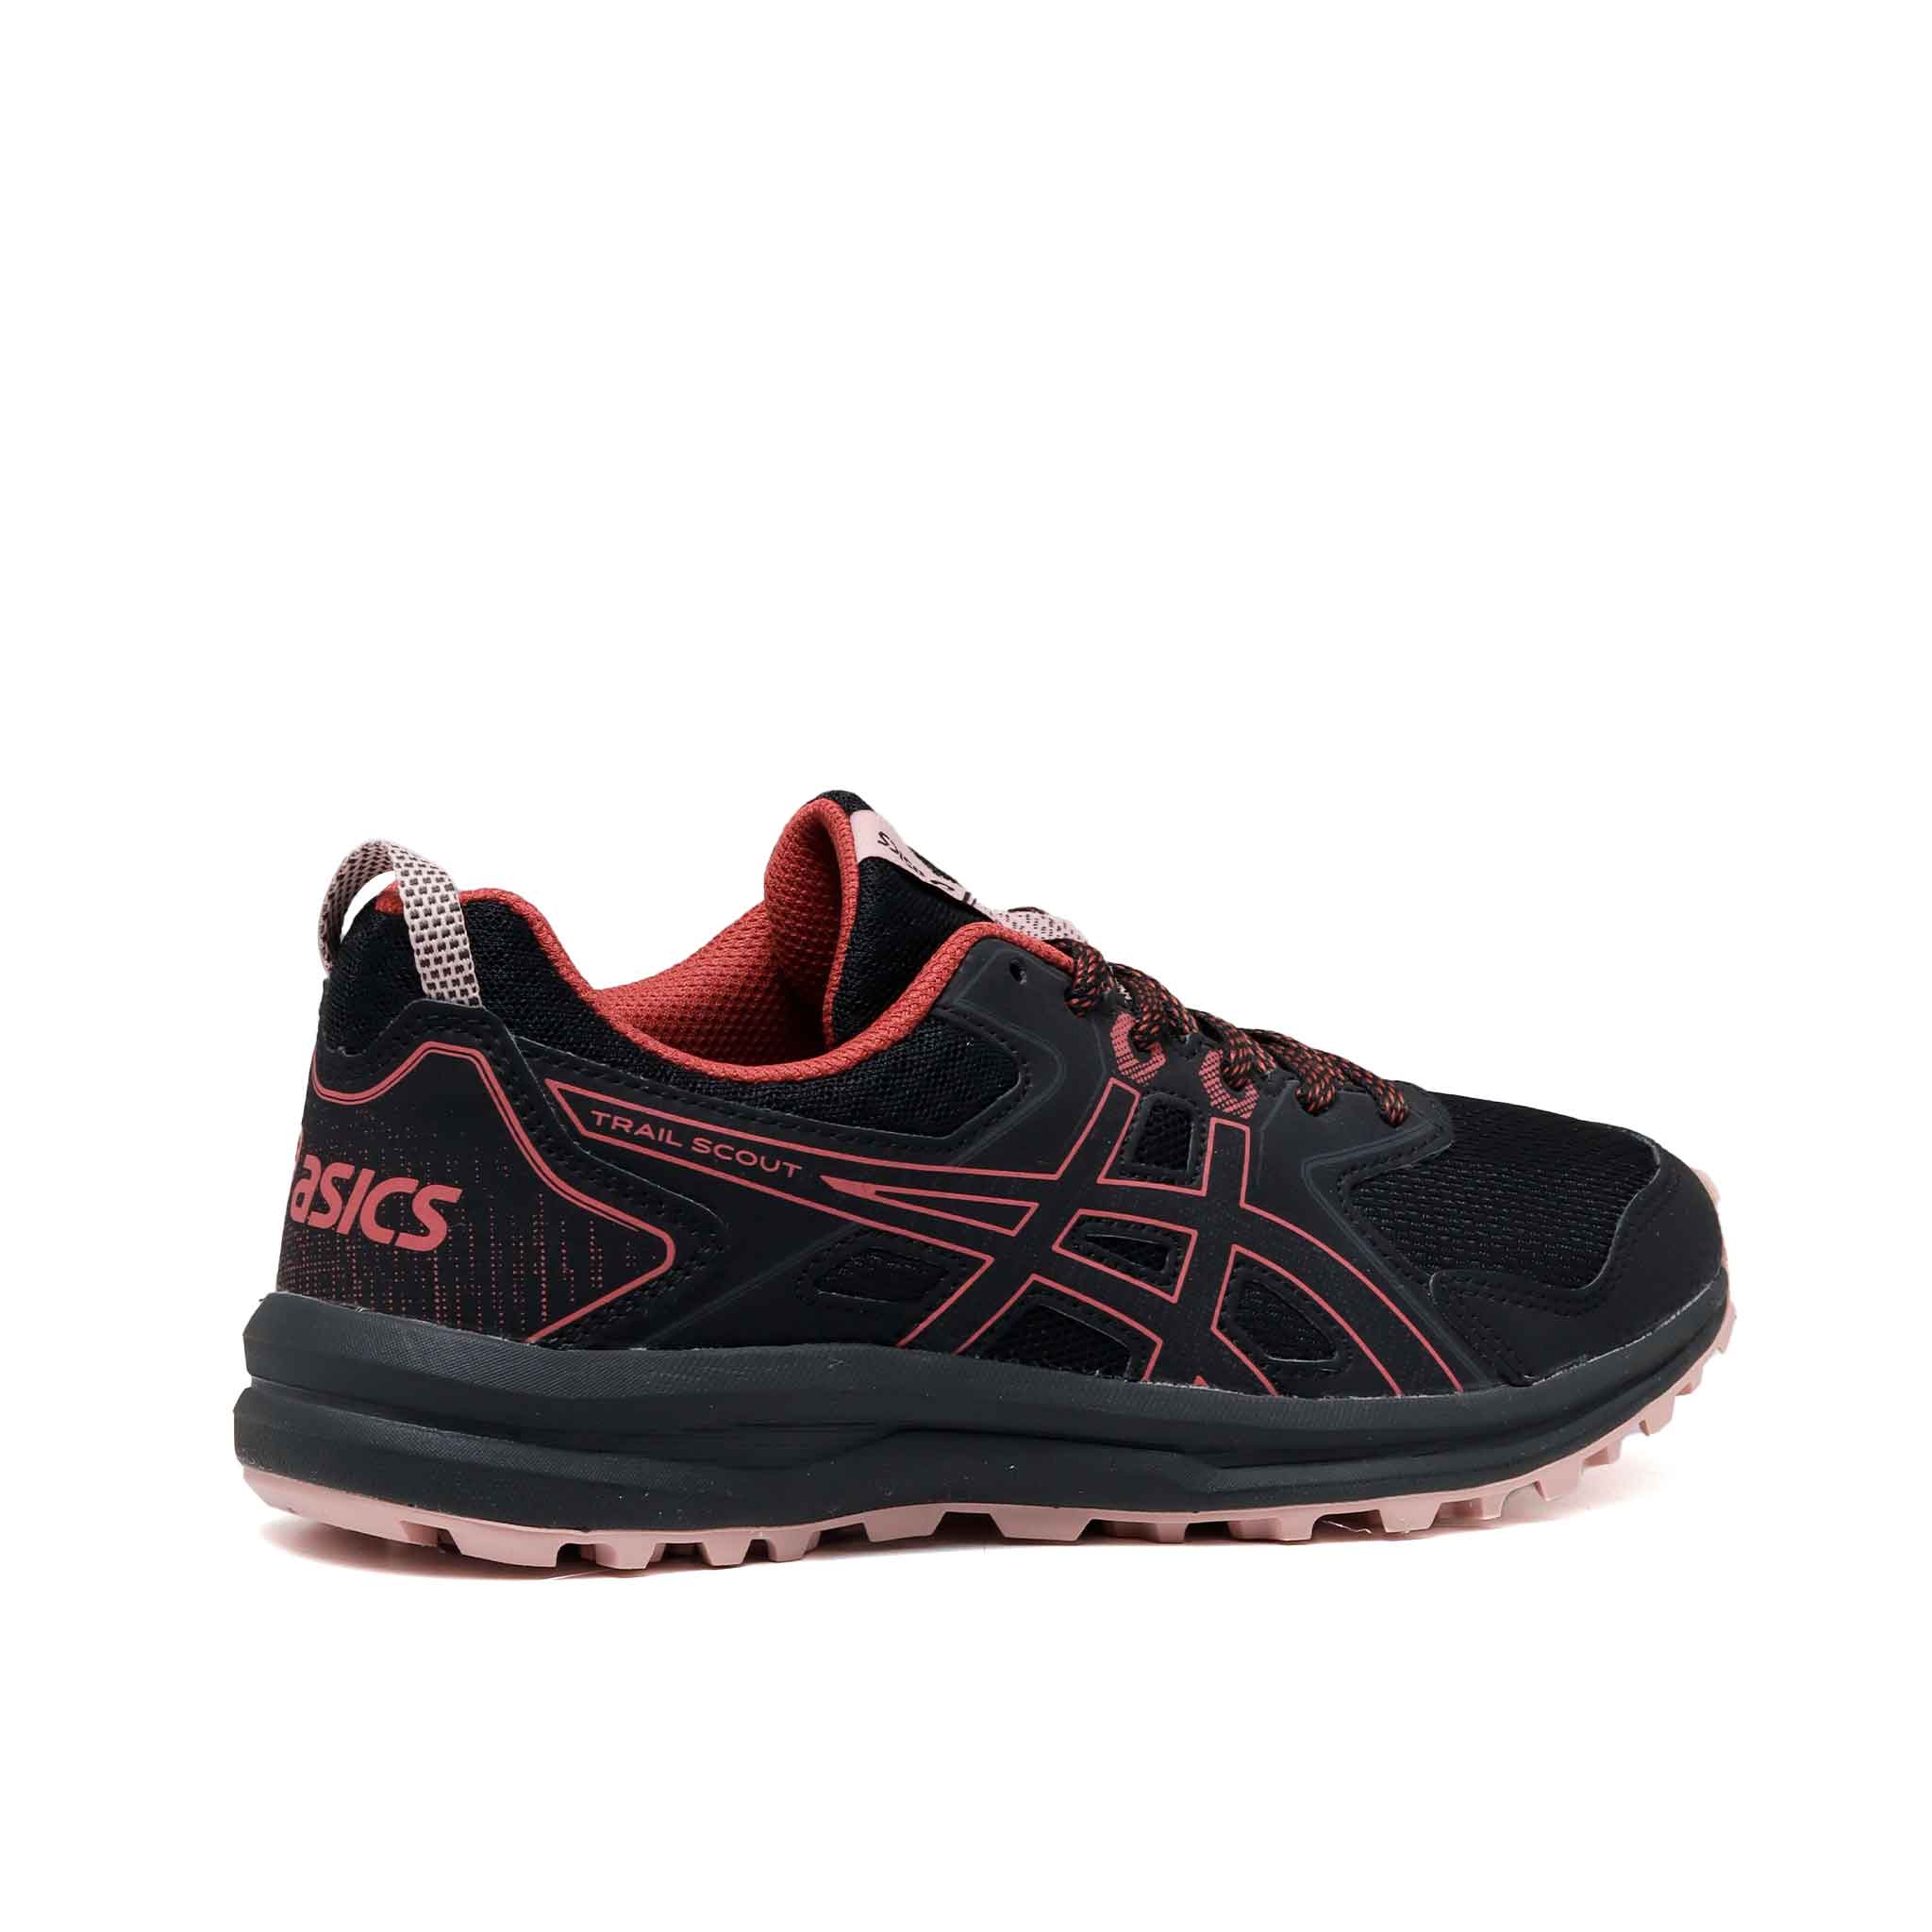 Tenis Asics Trail Scout